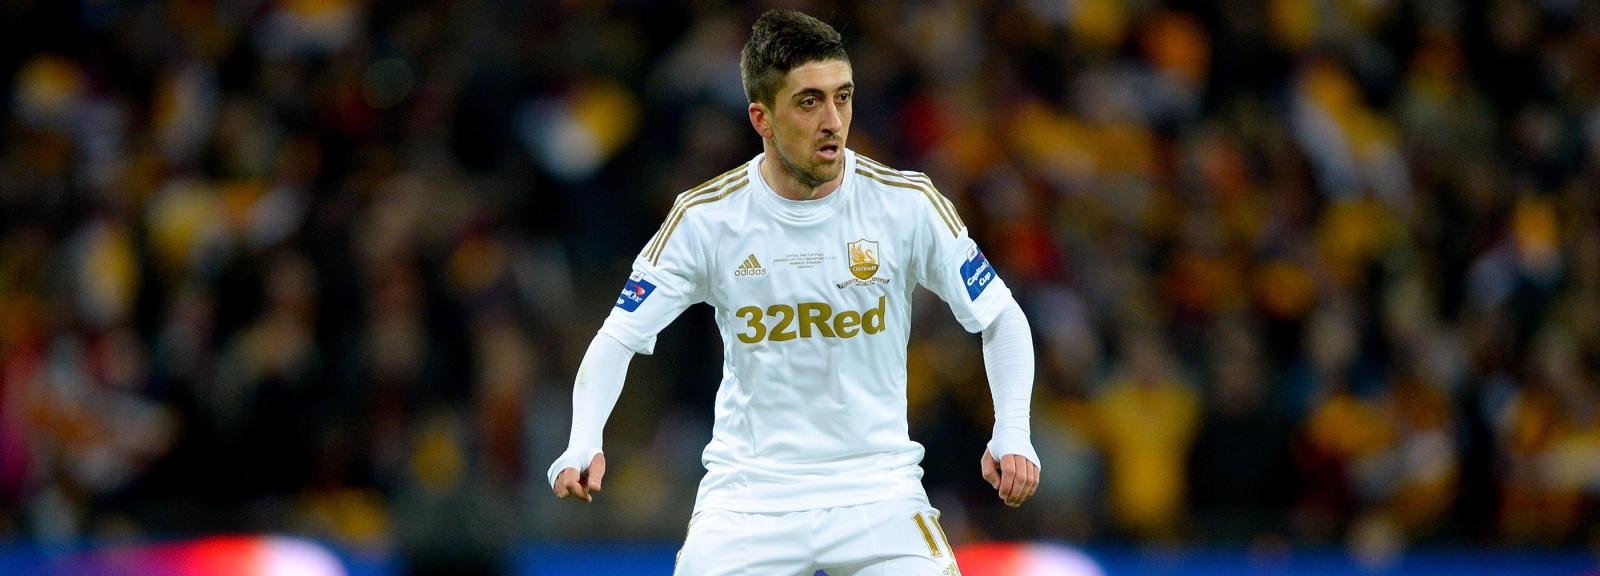 Leeds United close in on loan deal for four-time capped Spain international